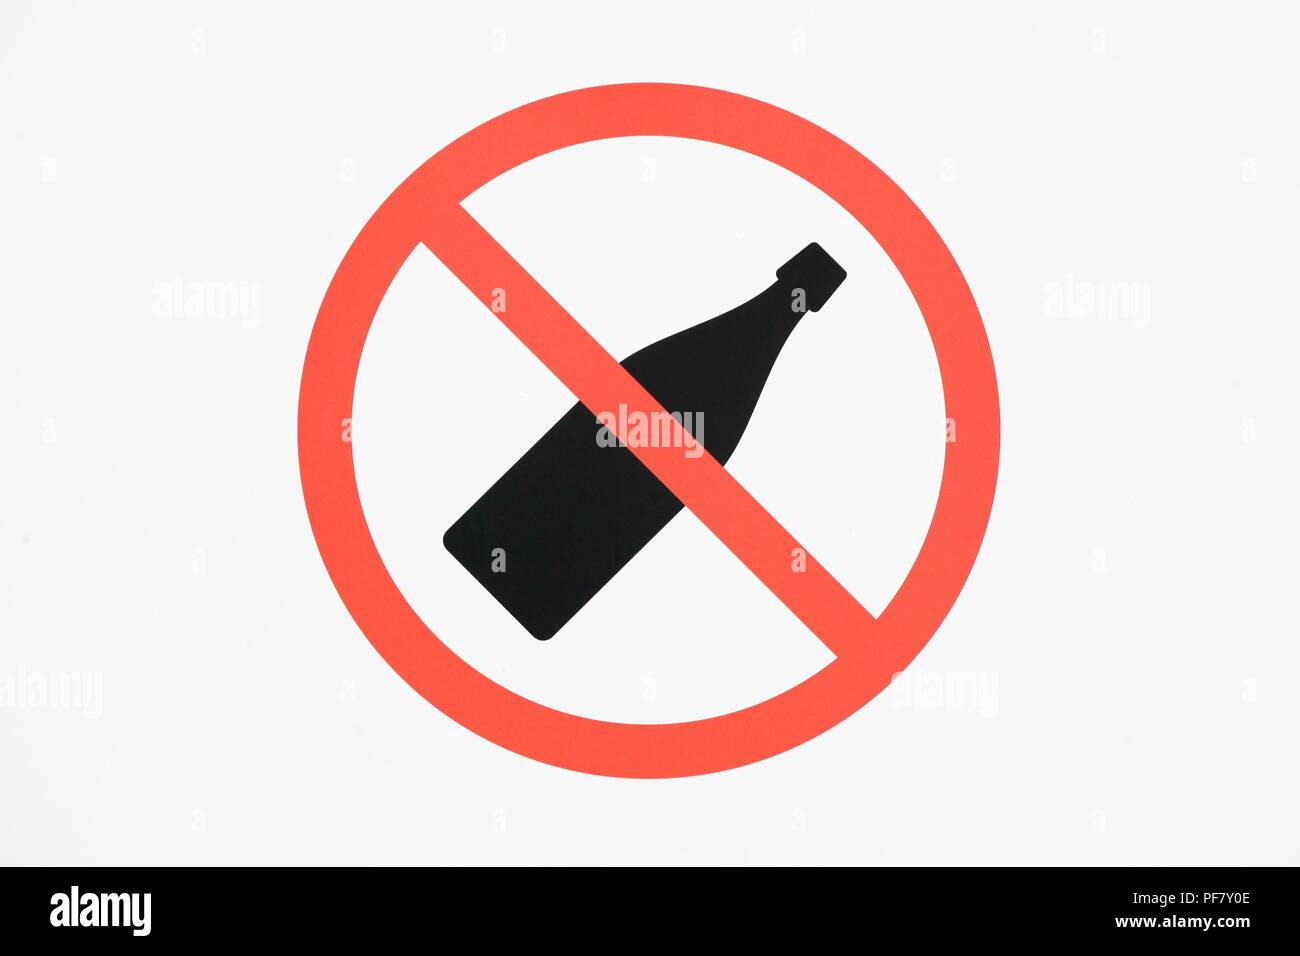 No alcohol sign with a white background Stock Photo